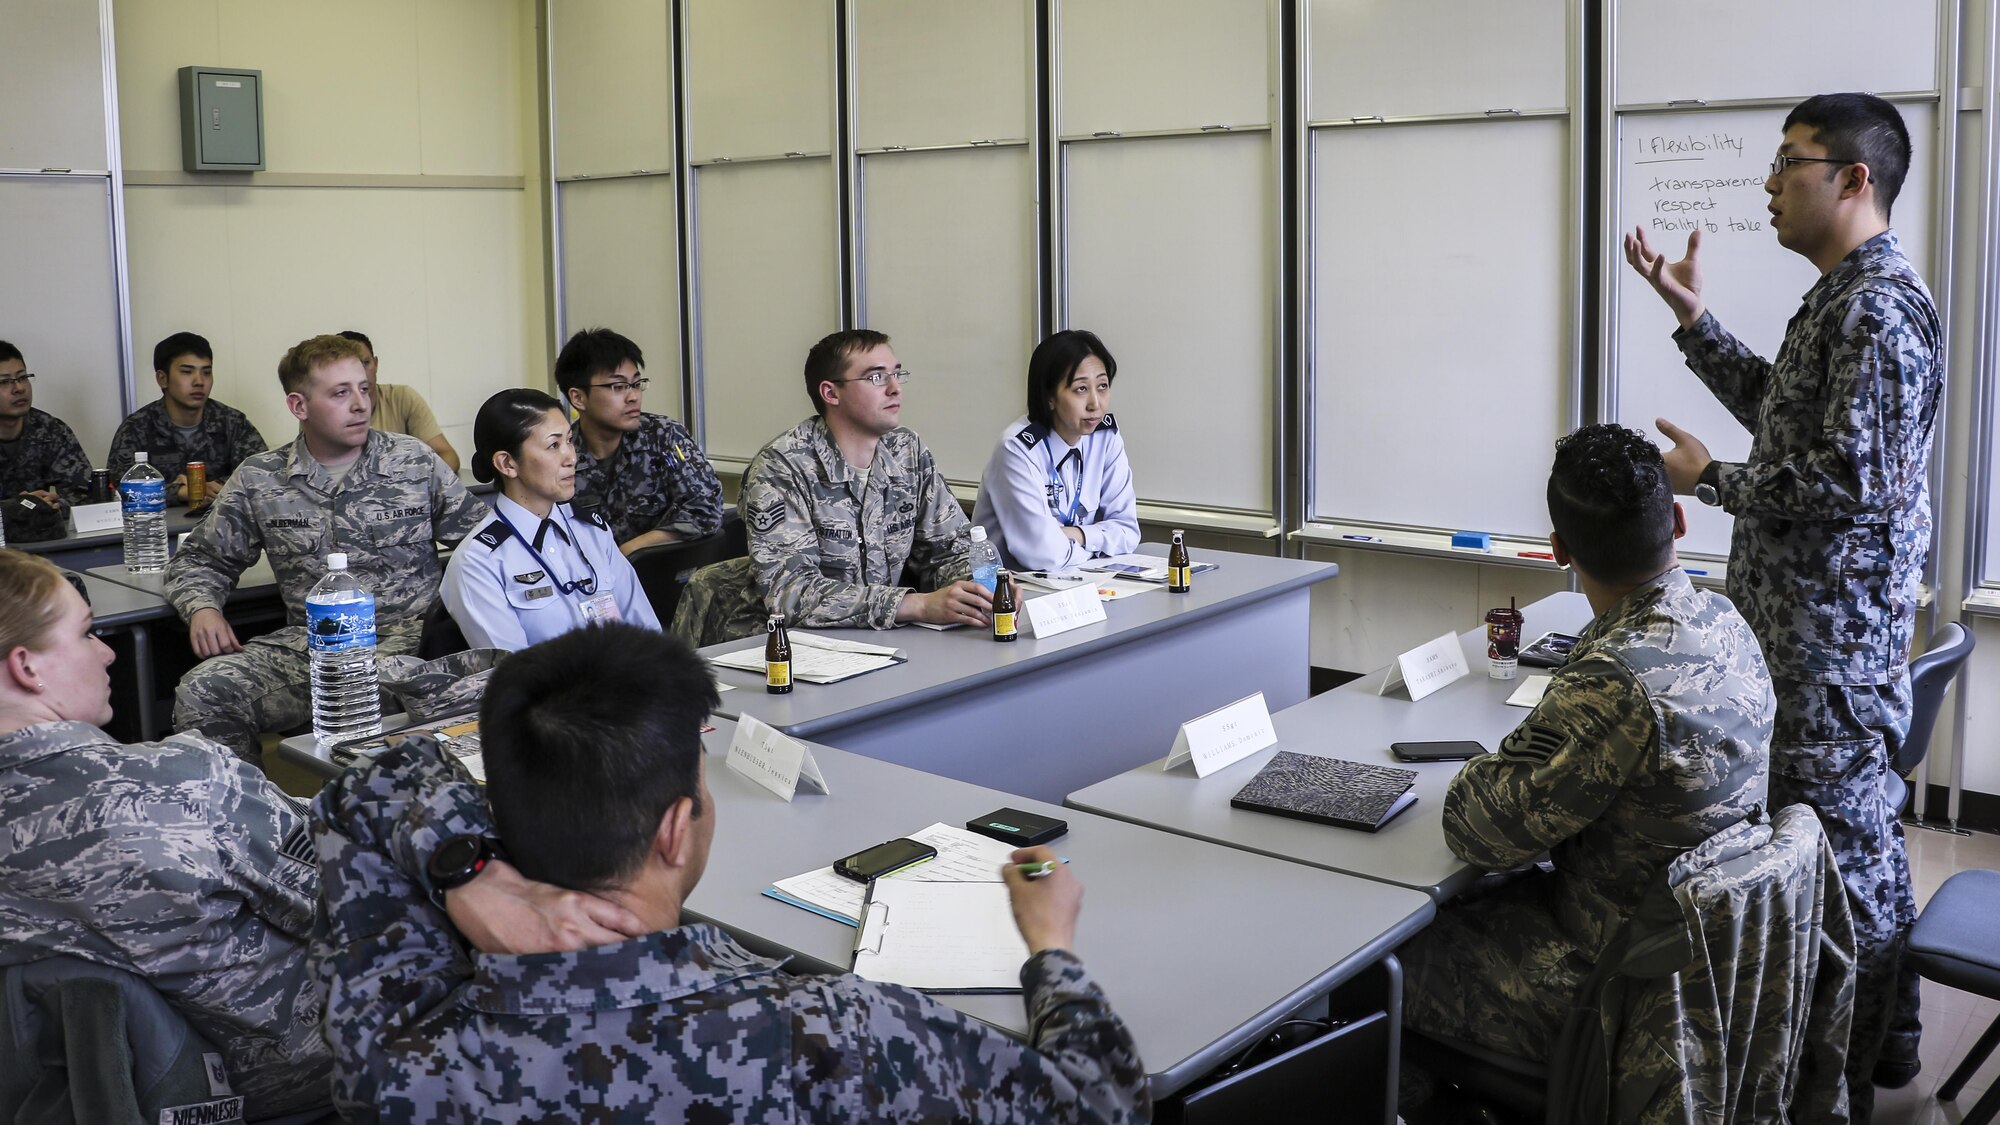 Koku-Jieitai Senior Airman Takashi Shibuya, a 2nd Air Wing Armament Maintenance Squadron armament technician, explains his view of leadership with U.S. and other Japanese Airmen during a 10-day U.S.-Japan Bilateral Career Training at Chitose Air Base, Japan, April 19, 2017. The U.S. and Japanese participants broke out into three groups, each allowed 30 minutes to discuss their top three leadership traits and then present their findings with the rest of the participants. Koku-Jieitai is the traditional term for Japan Air Self Defense Force used by the Japanese. (Japanese Air Self-Defense Force photo by Chief Master Sgt. Katsuaki Imazeki)